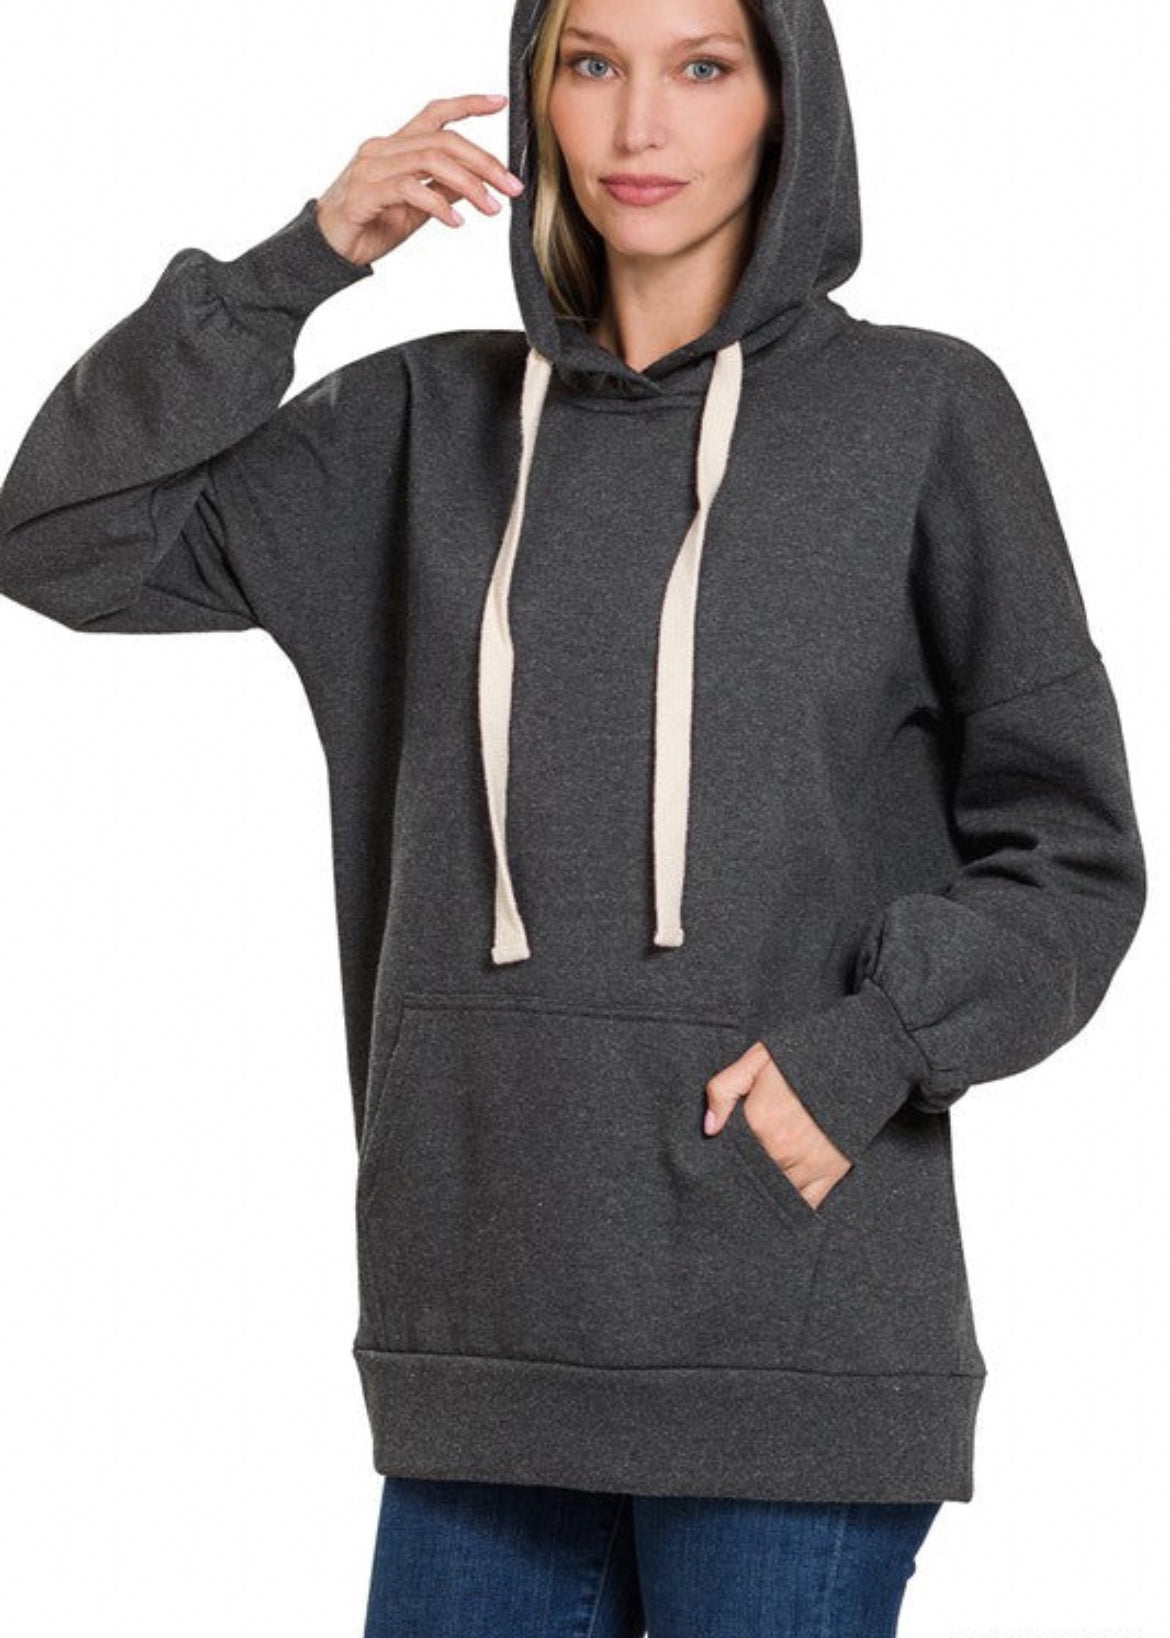 Oversized hoodie sweatshirt with kangaroo front pocket and cream drawstrings. Shown in charcoal